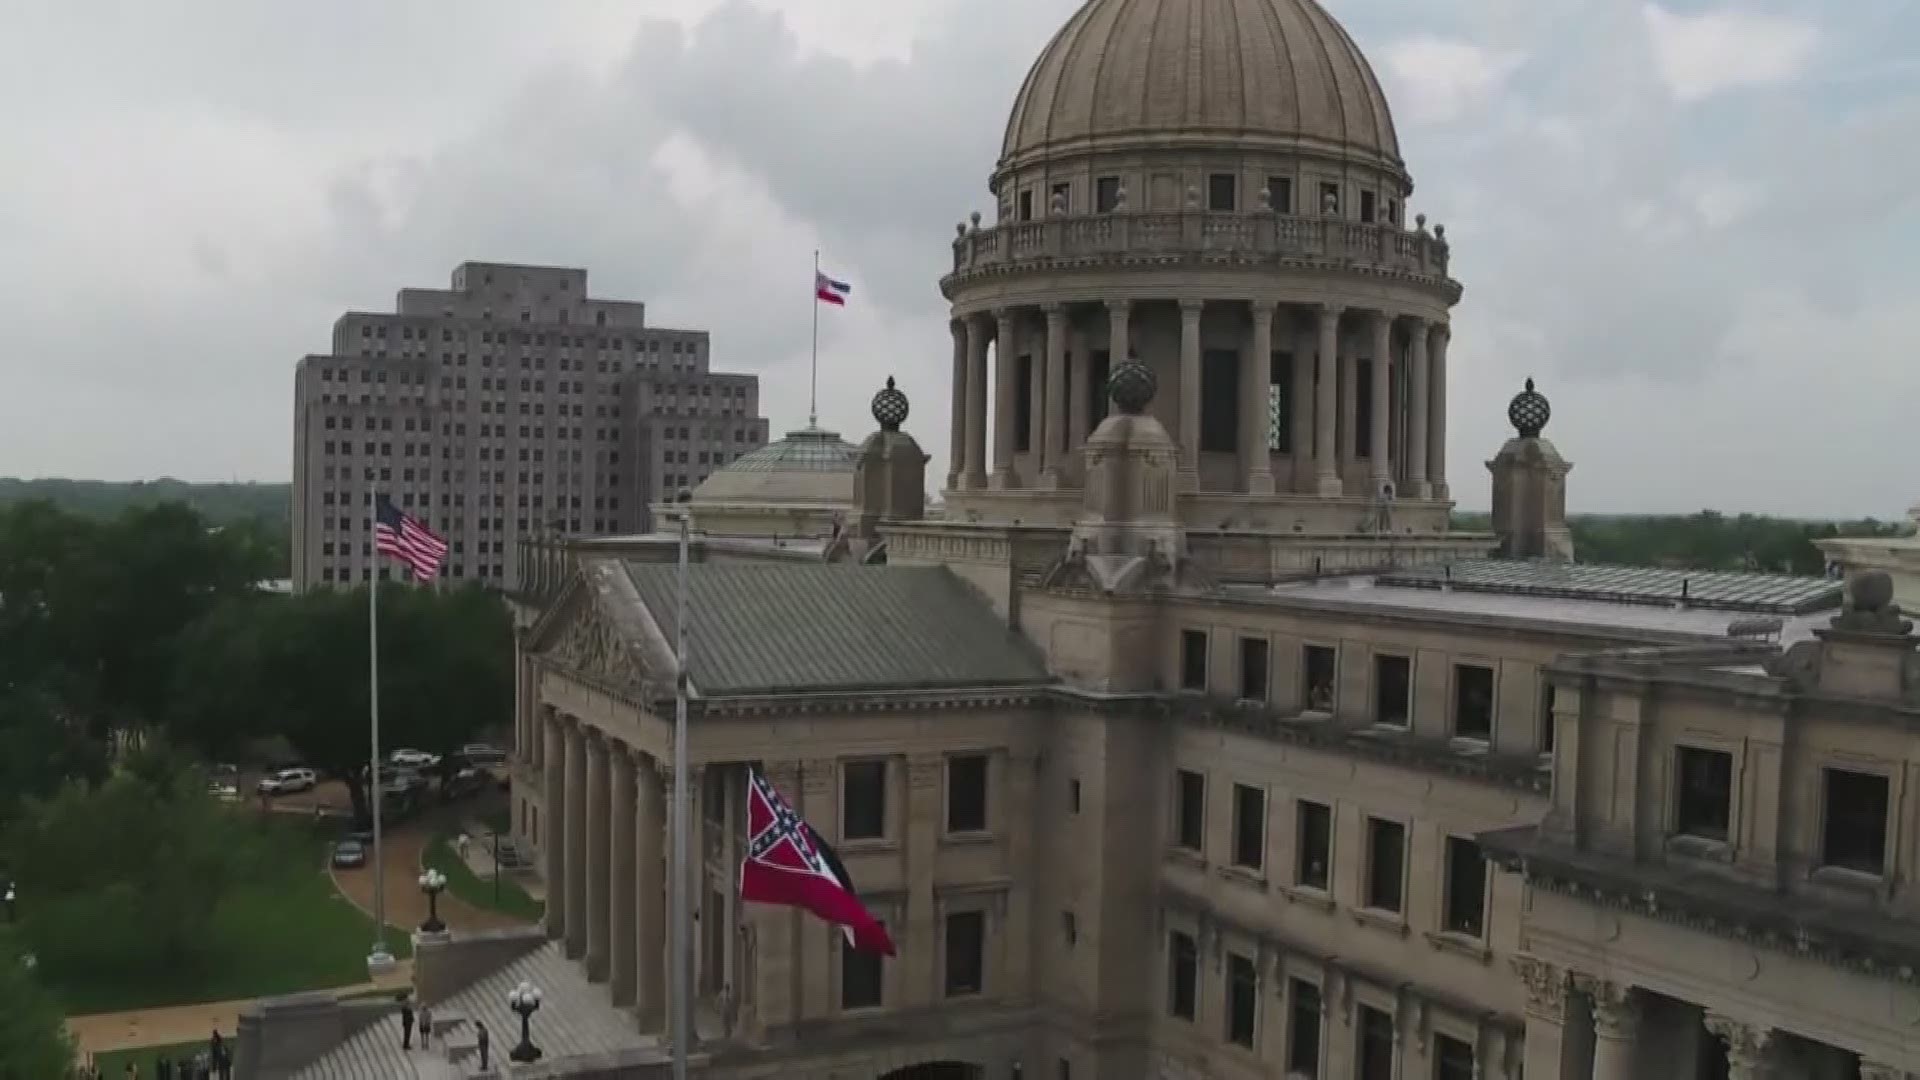 Mississippi officials are having a ceremony to relegate the former state flag to history.